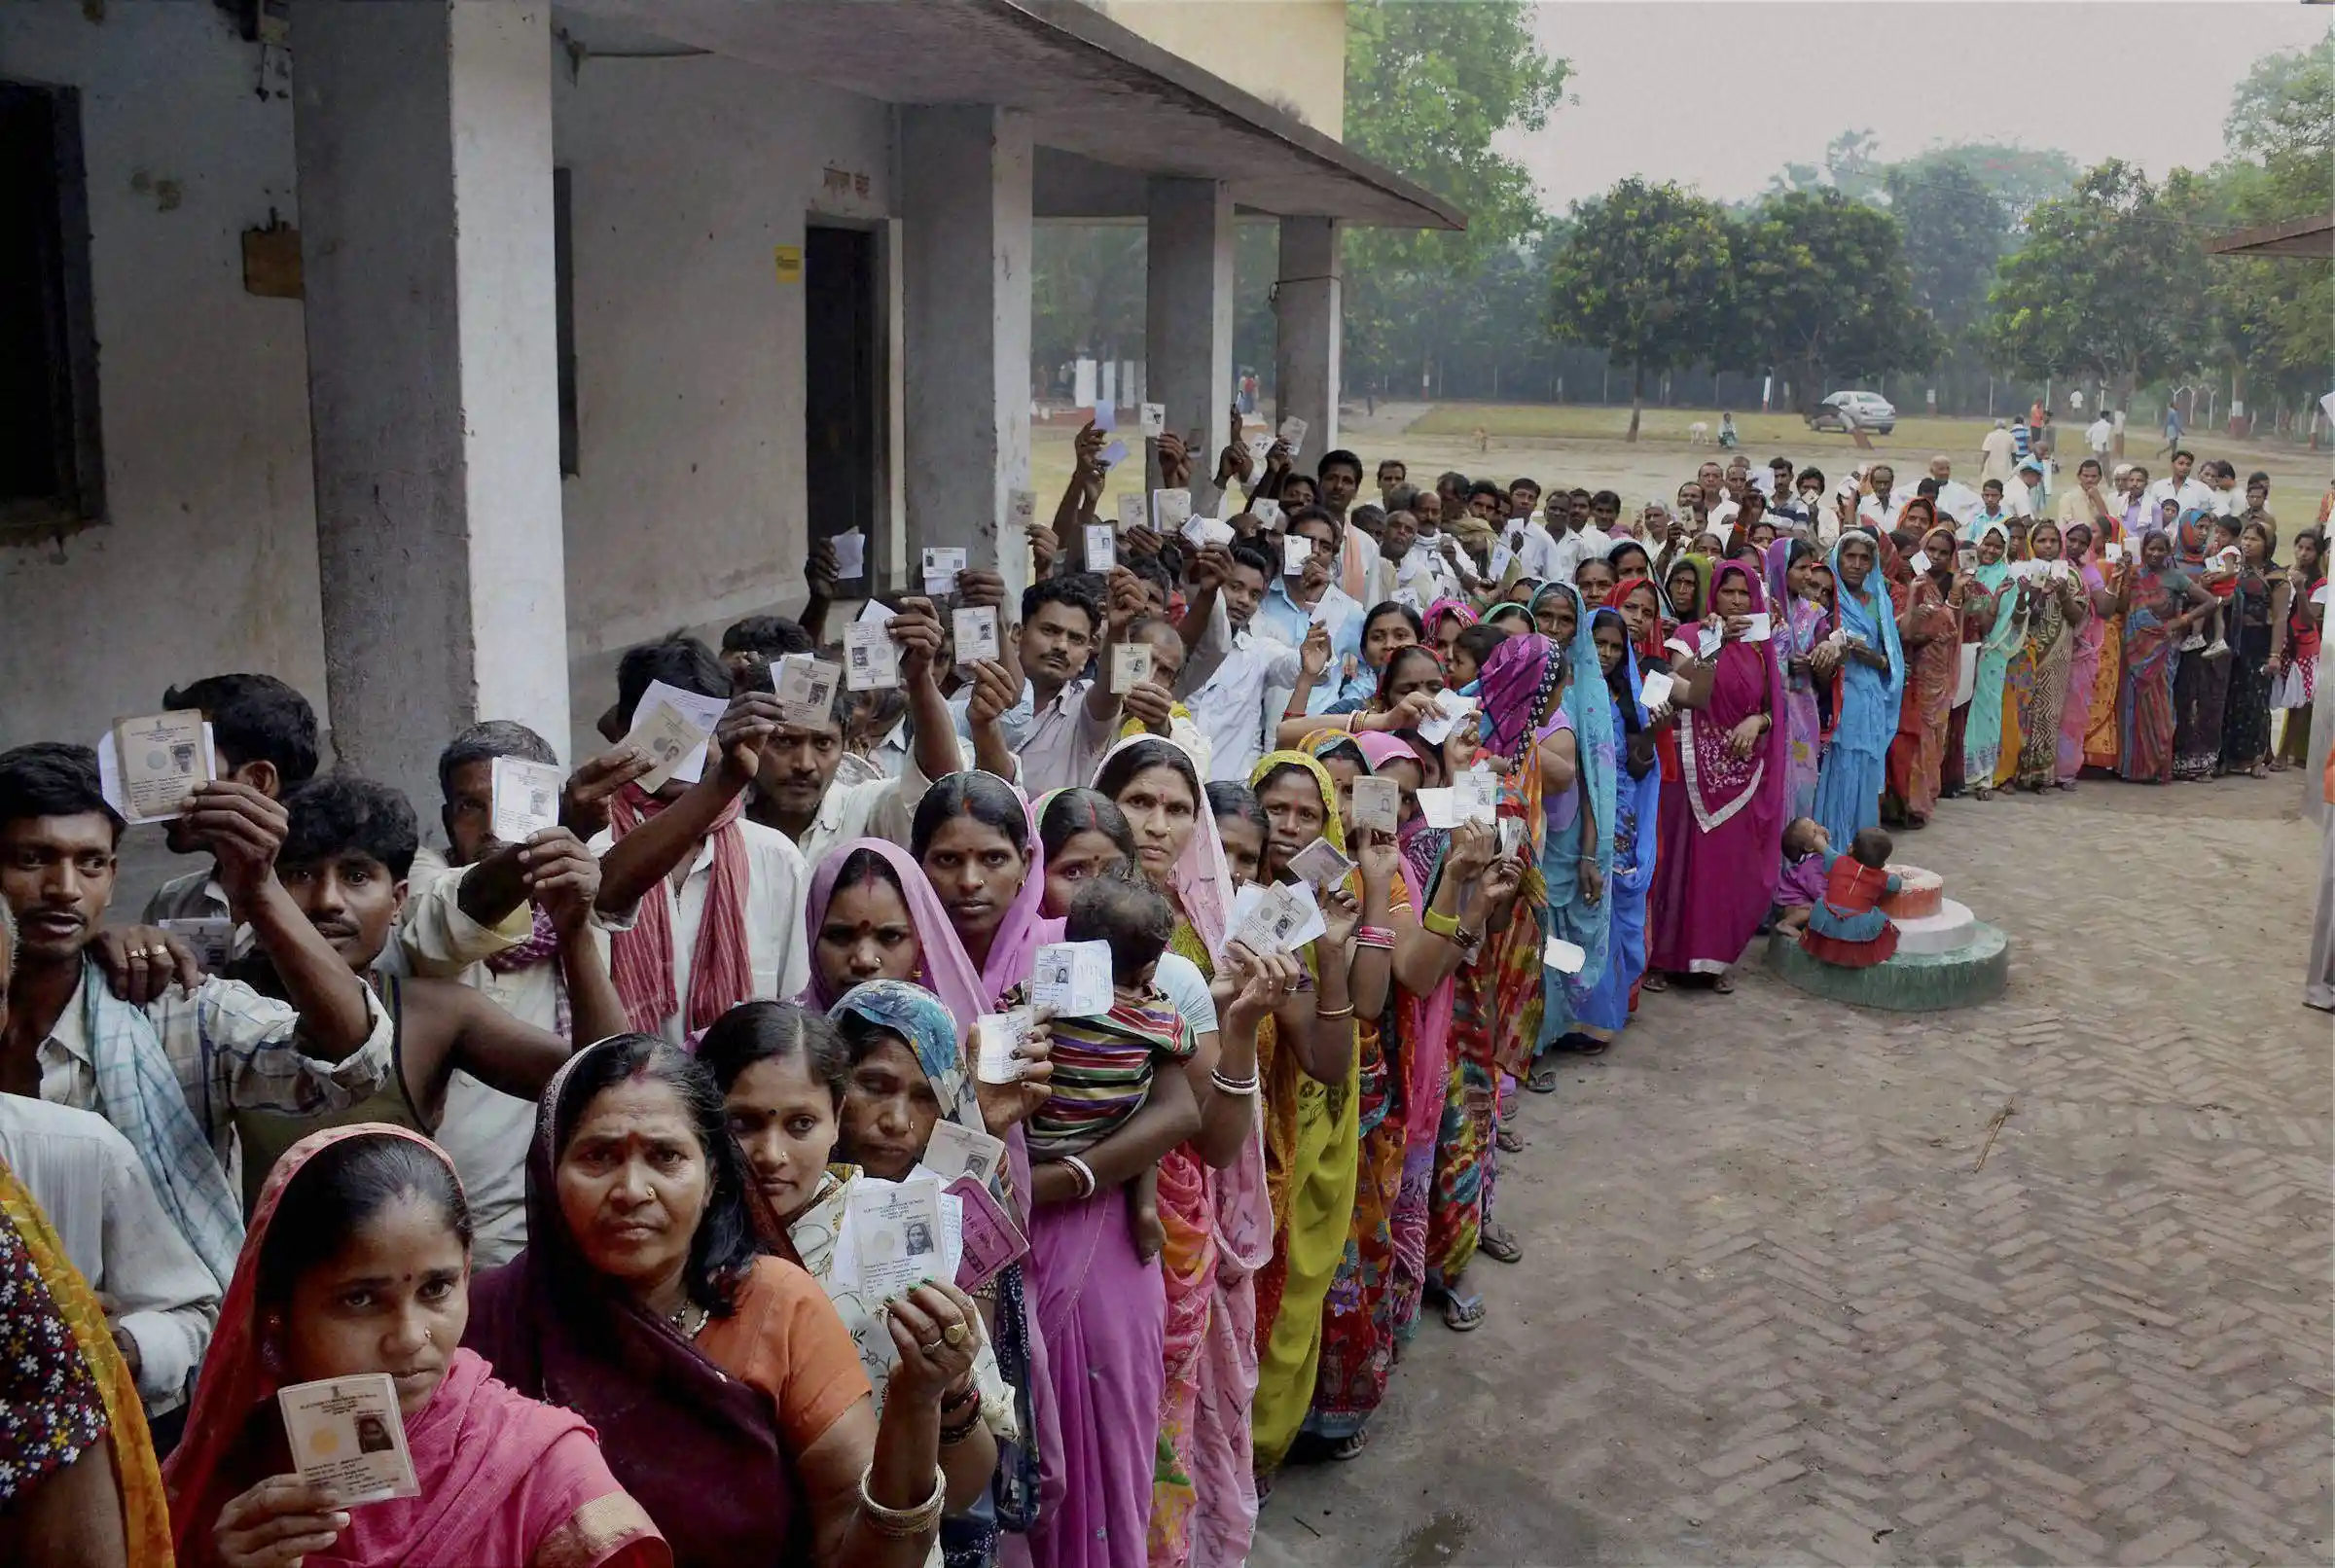 Proof of Democracy; Voters standing in a line to choose their representative; Source: TheWire.in; Public Domain